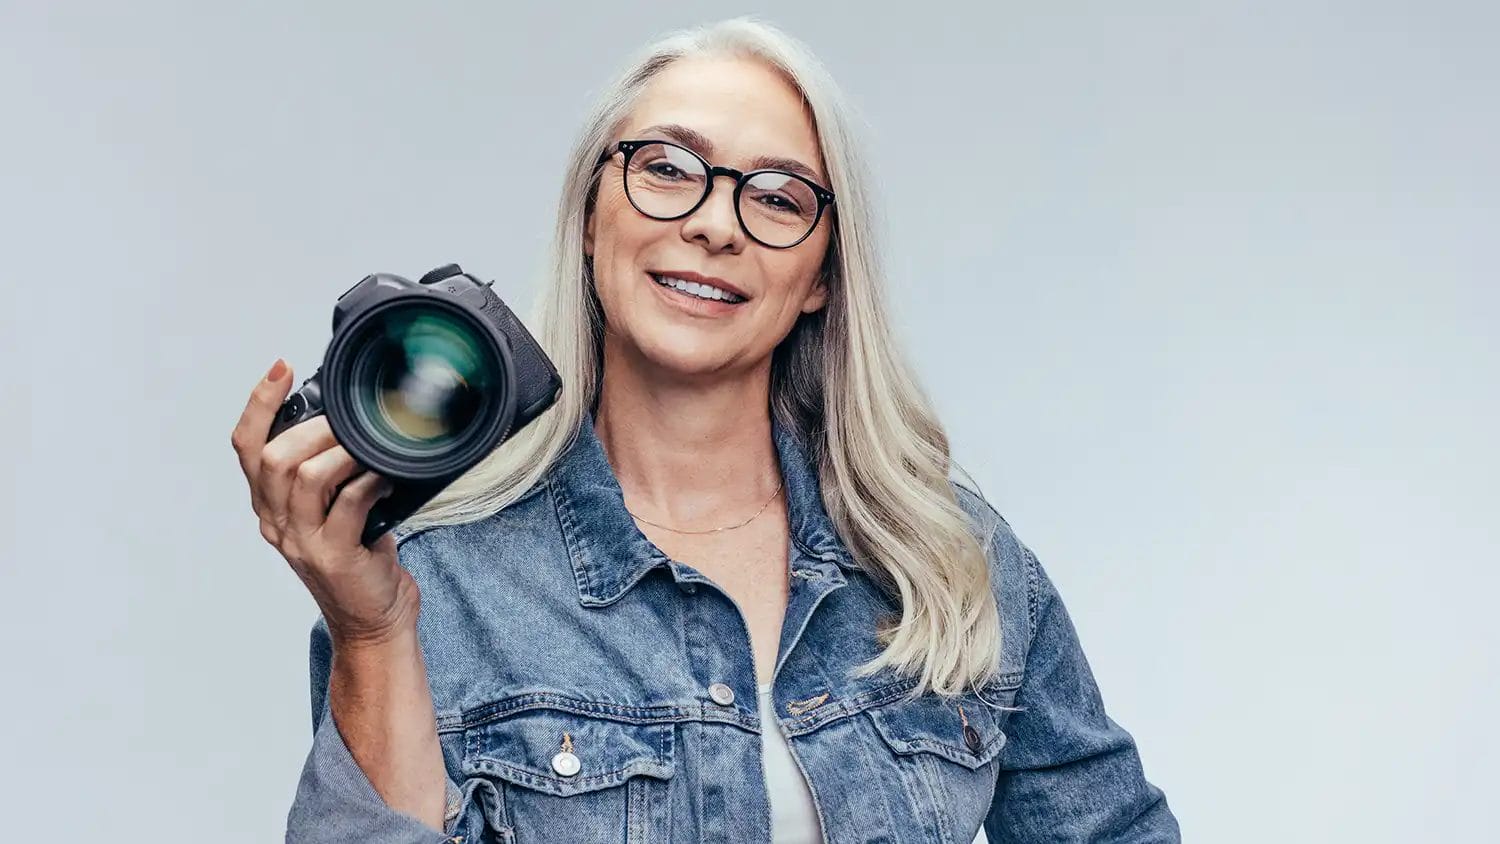 a lady, wearing glasses, with white hair holding a camera wearing a denim jacket